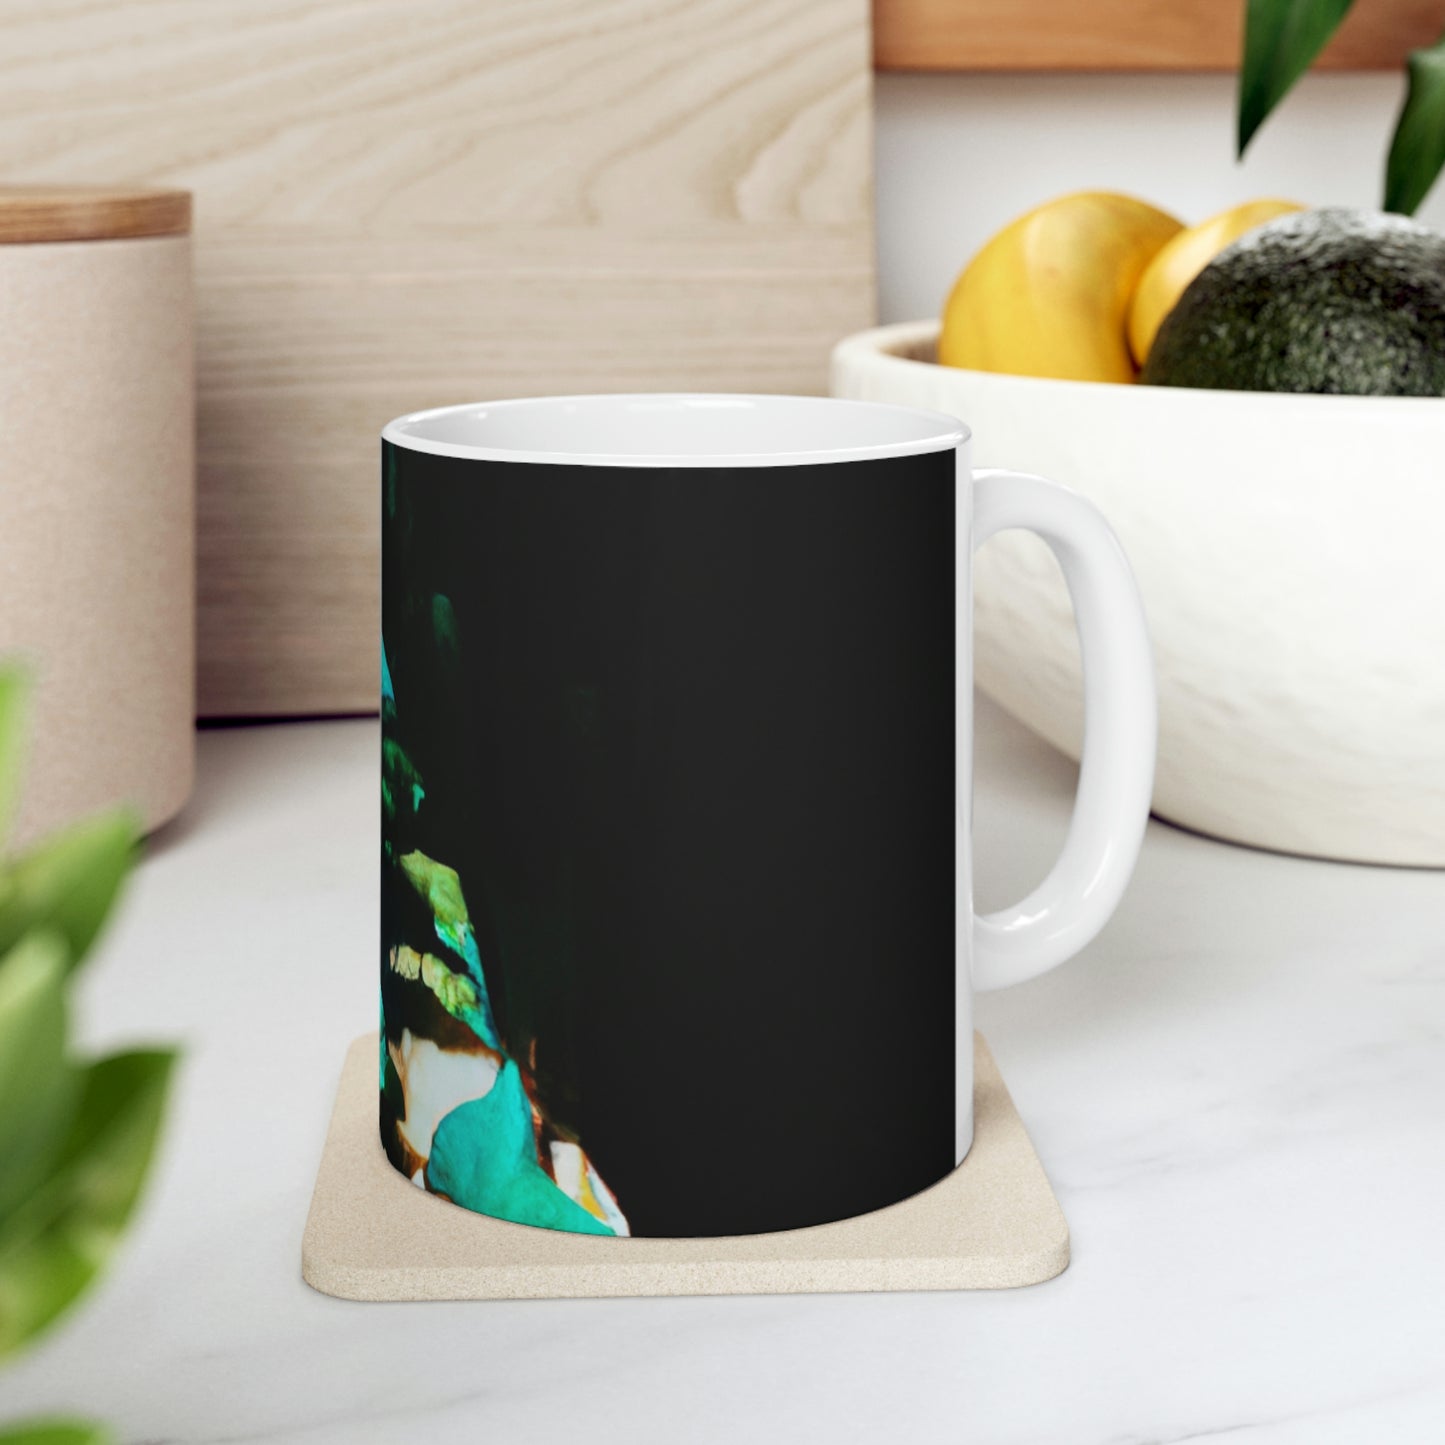 The Gleaming Relic of the Cave - The Alien Ceramic Mug 11 oz